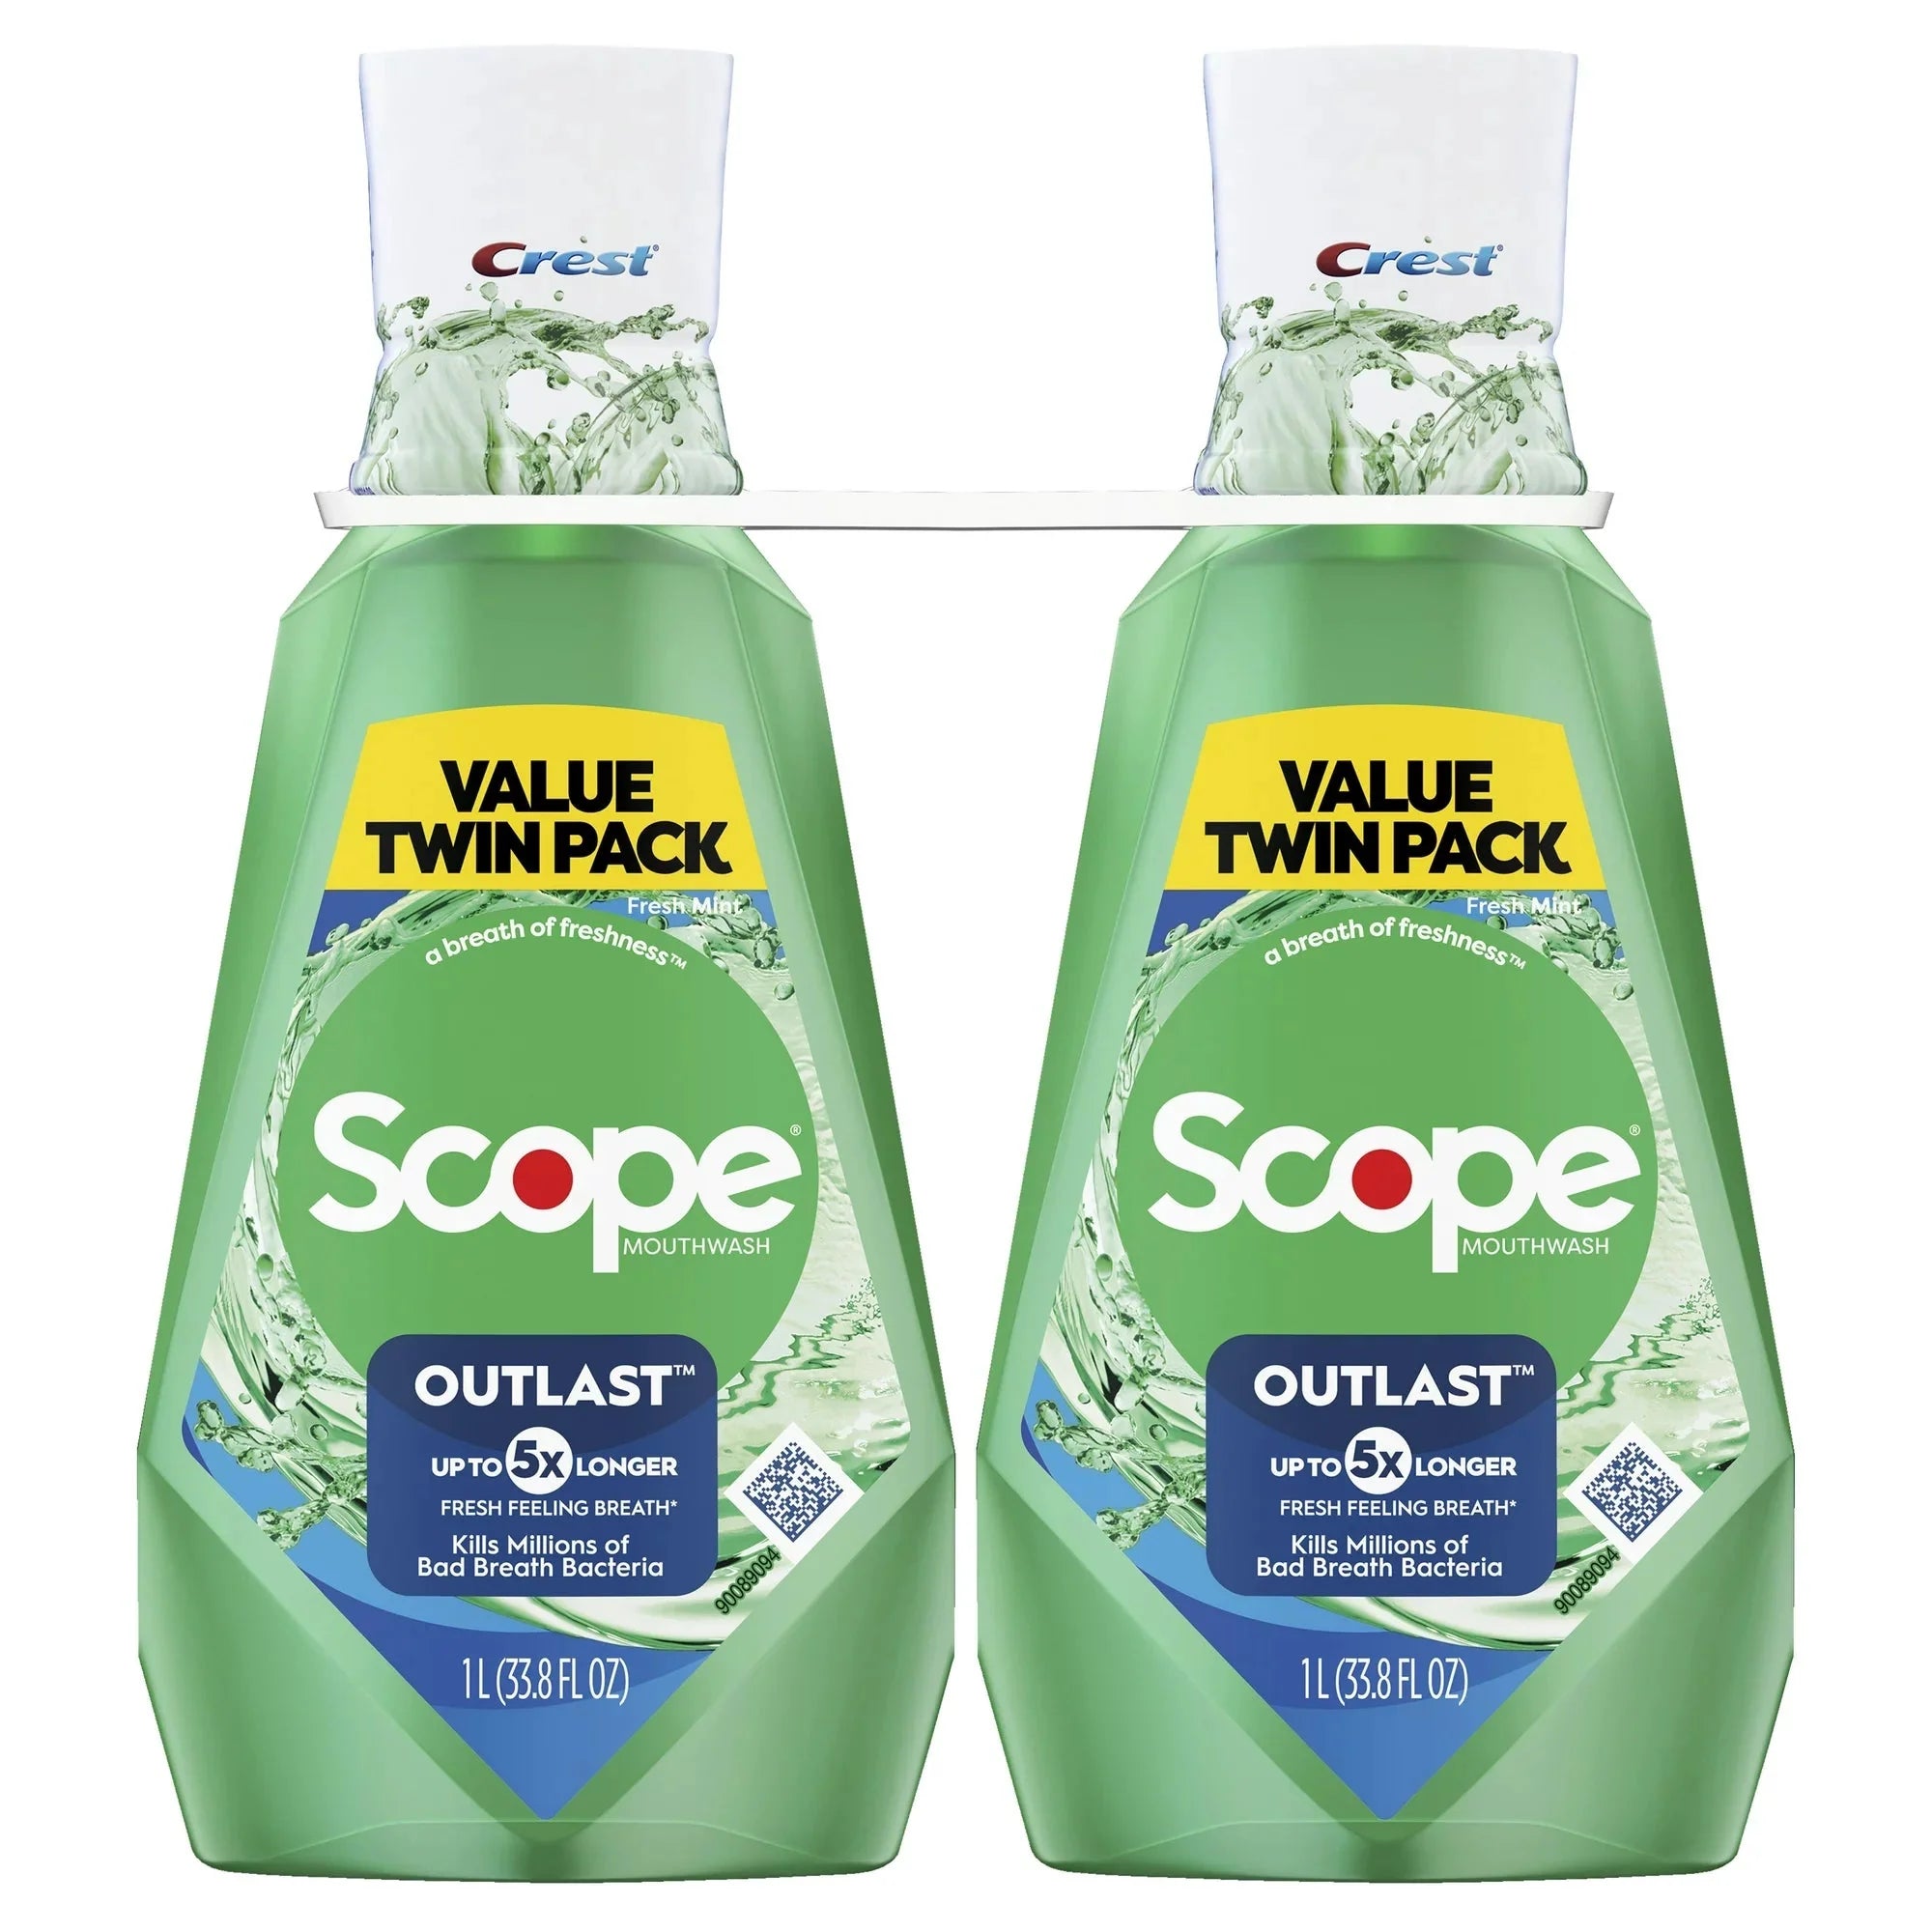 Wholesale prices with free shipping all over United States Crest Scope Outlast Mouthwash, Fresh Mint, 1L, Pack of 2 - Steven Deals